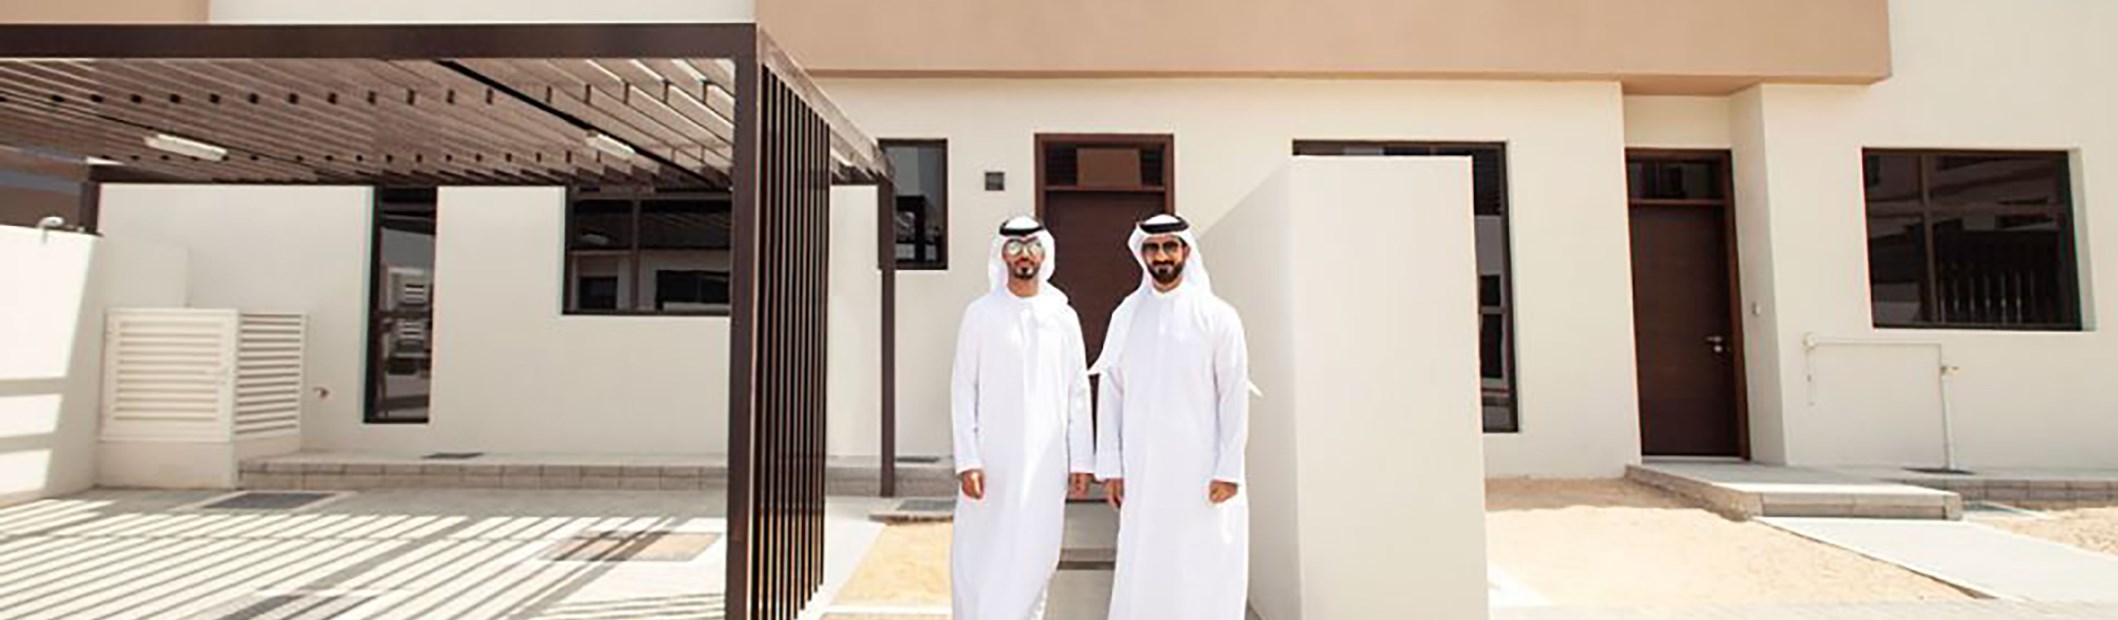 Arabian Business: Sharjah developer Arada delivers first homes to buyers